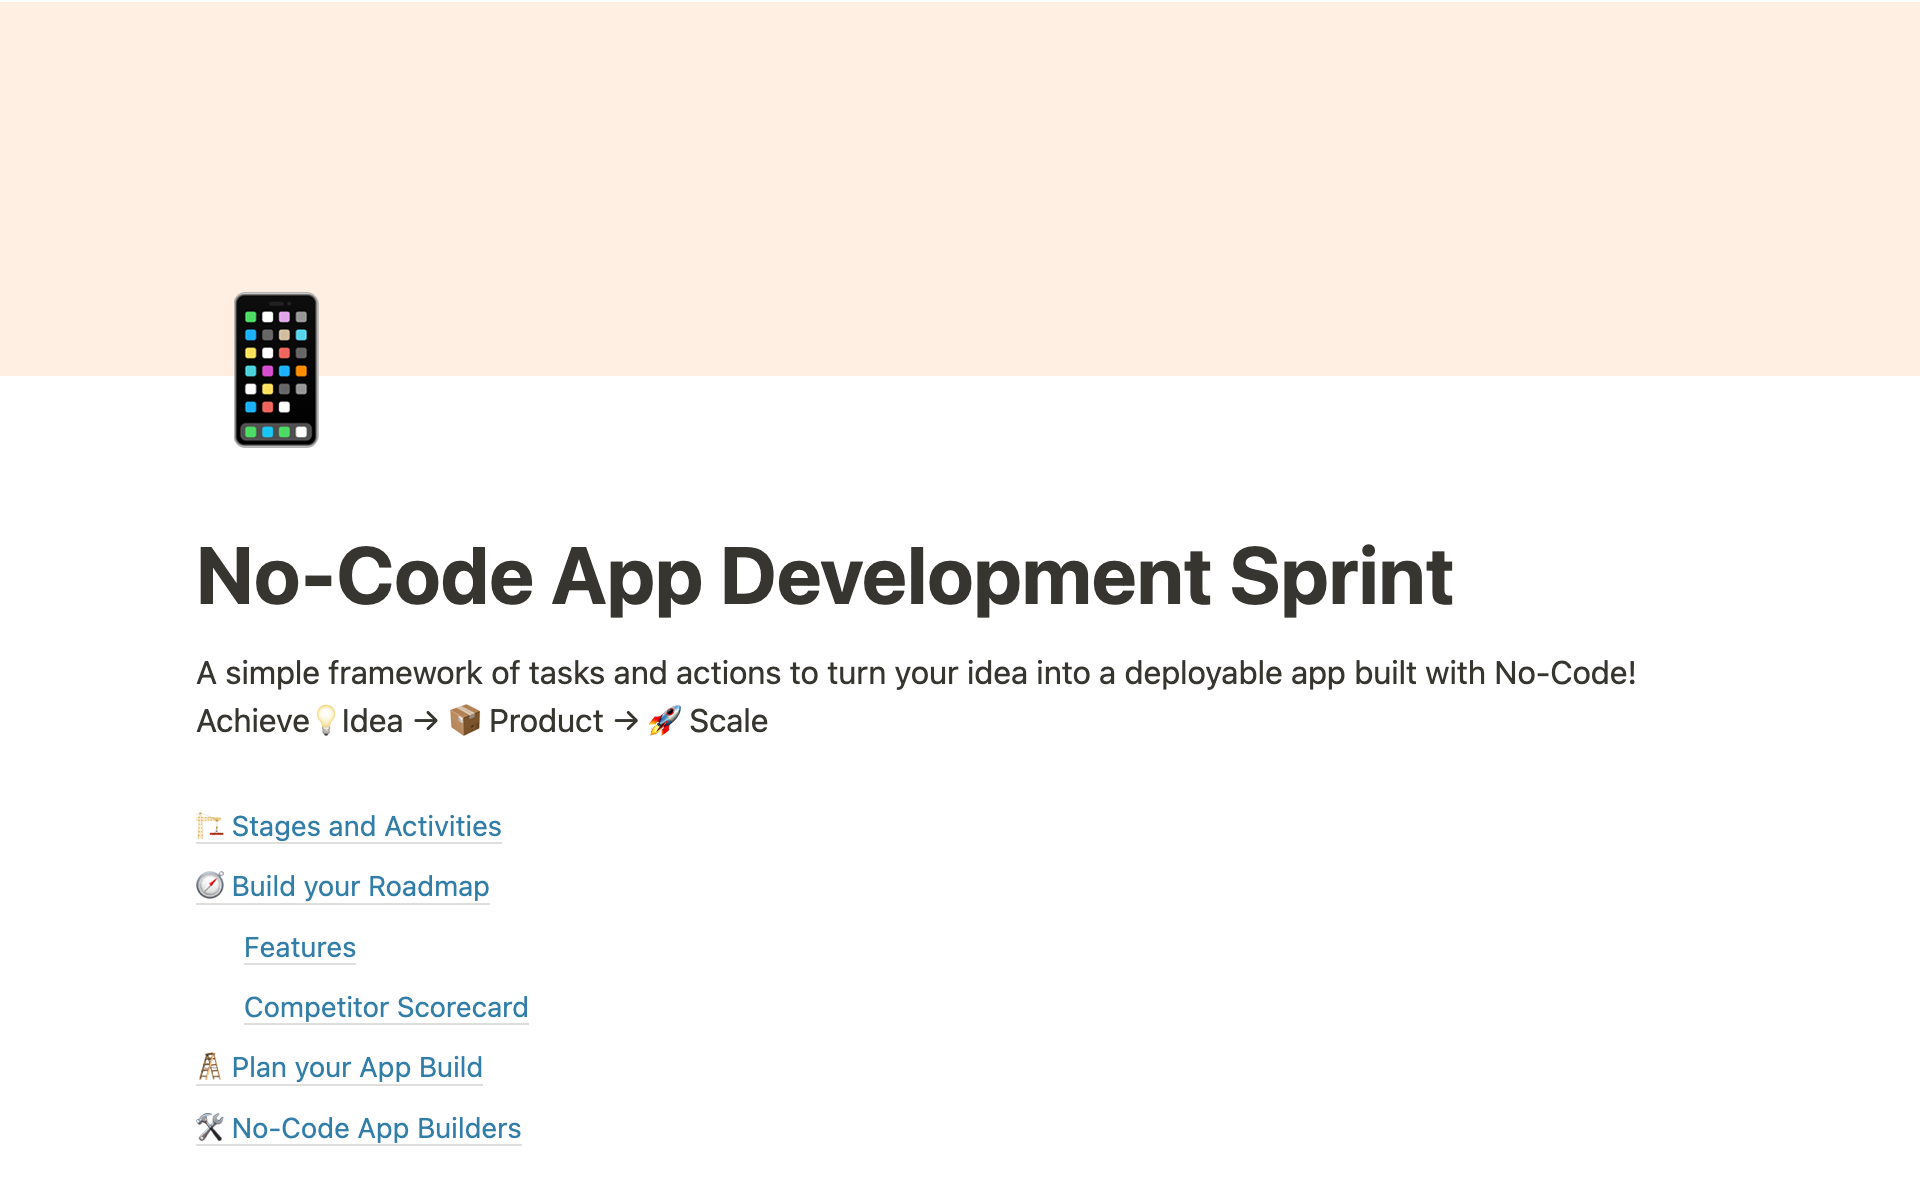 A simple framework of tasks and actions to turn your idea into an app built with No-Code!